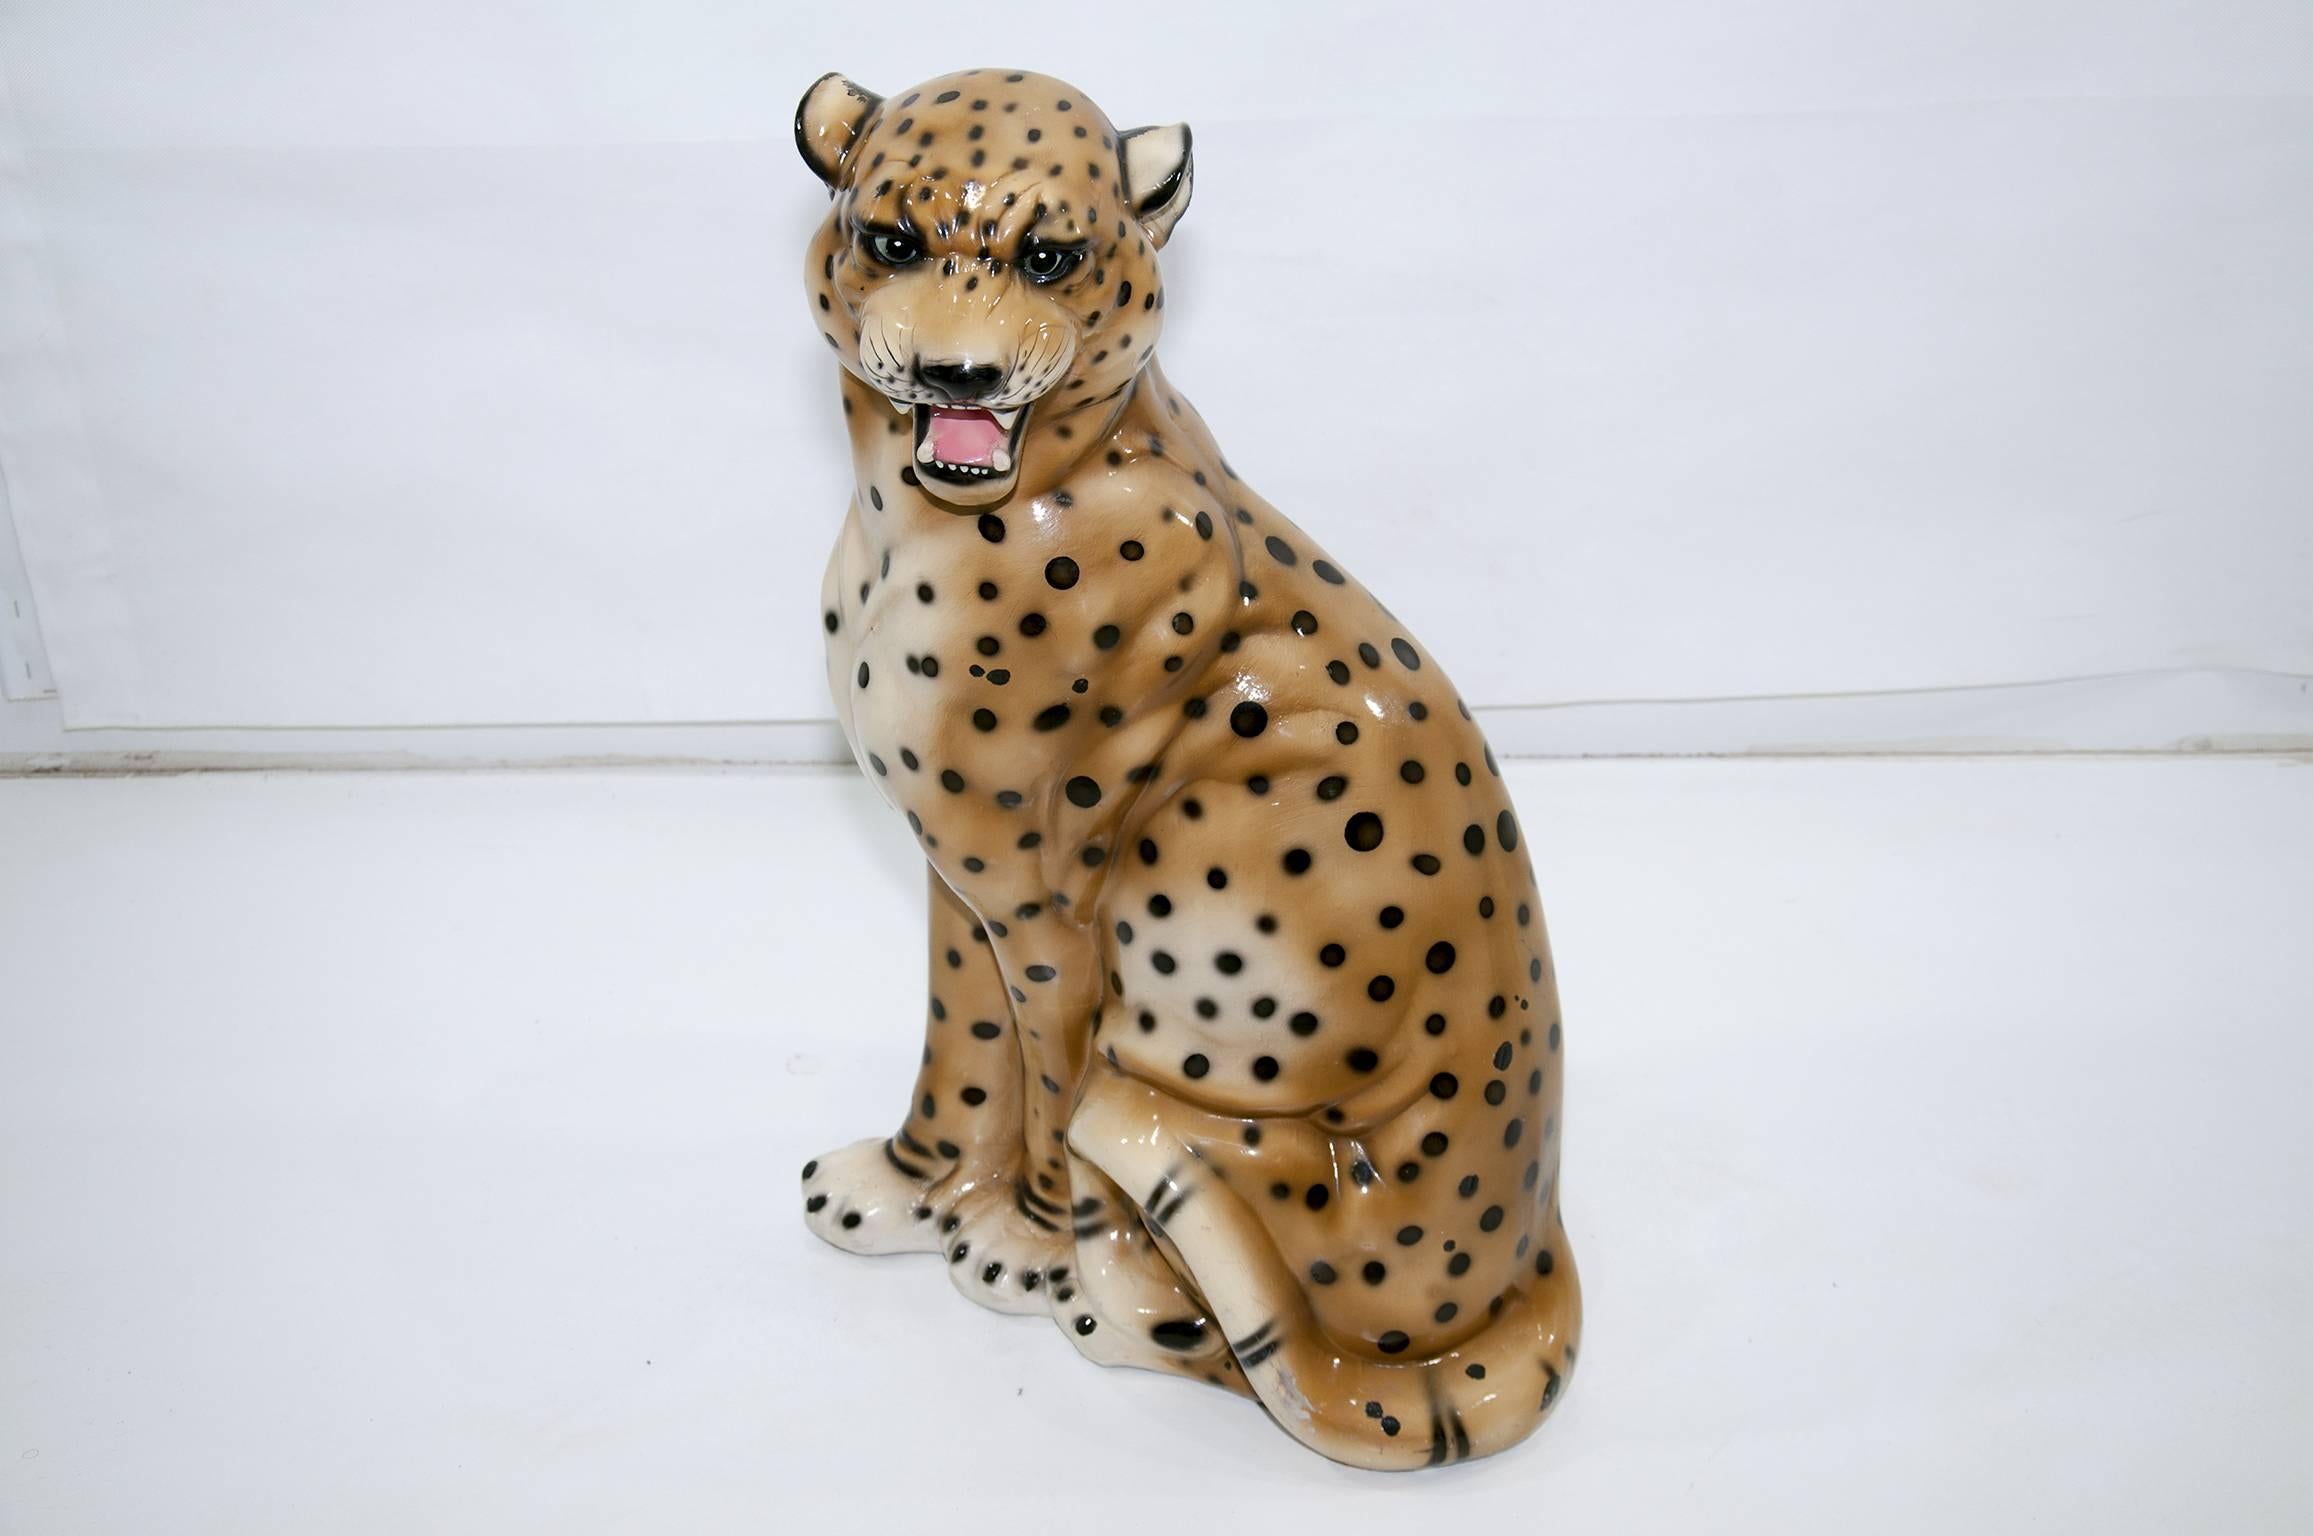 Large Leopard Italian Ceramic Sculpture from the 1950s with Hand-Painted Details 1